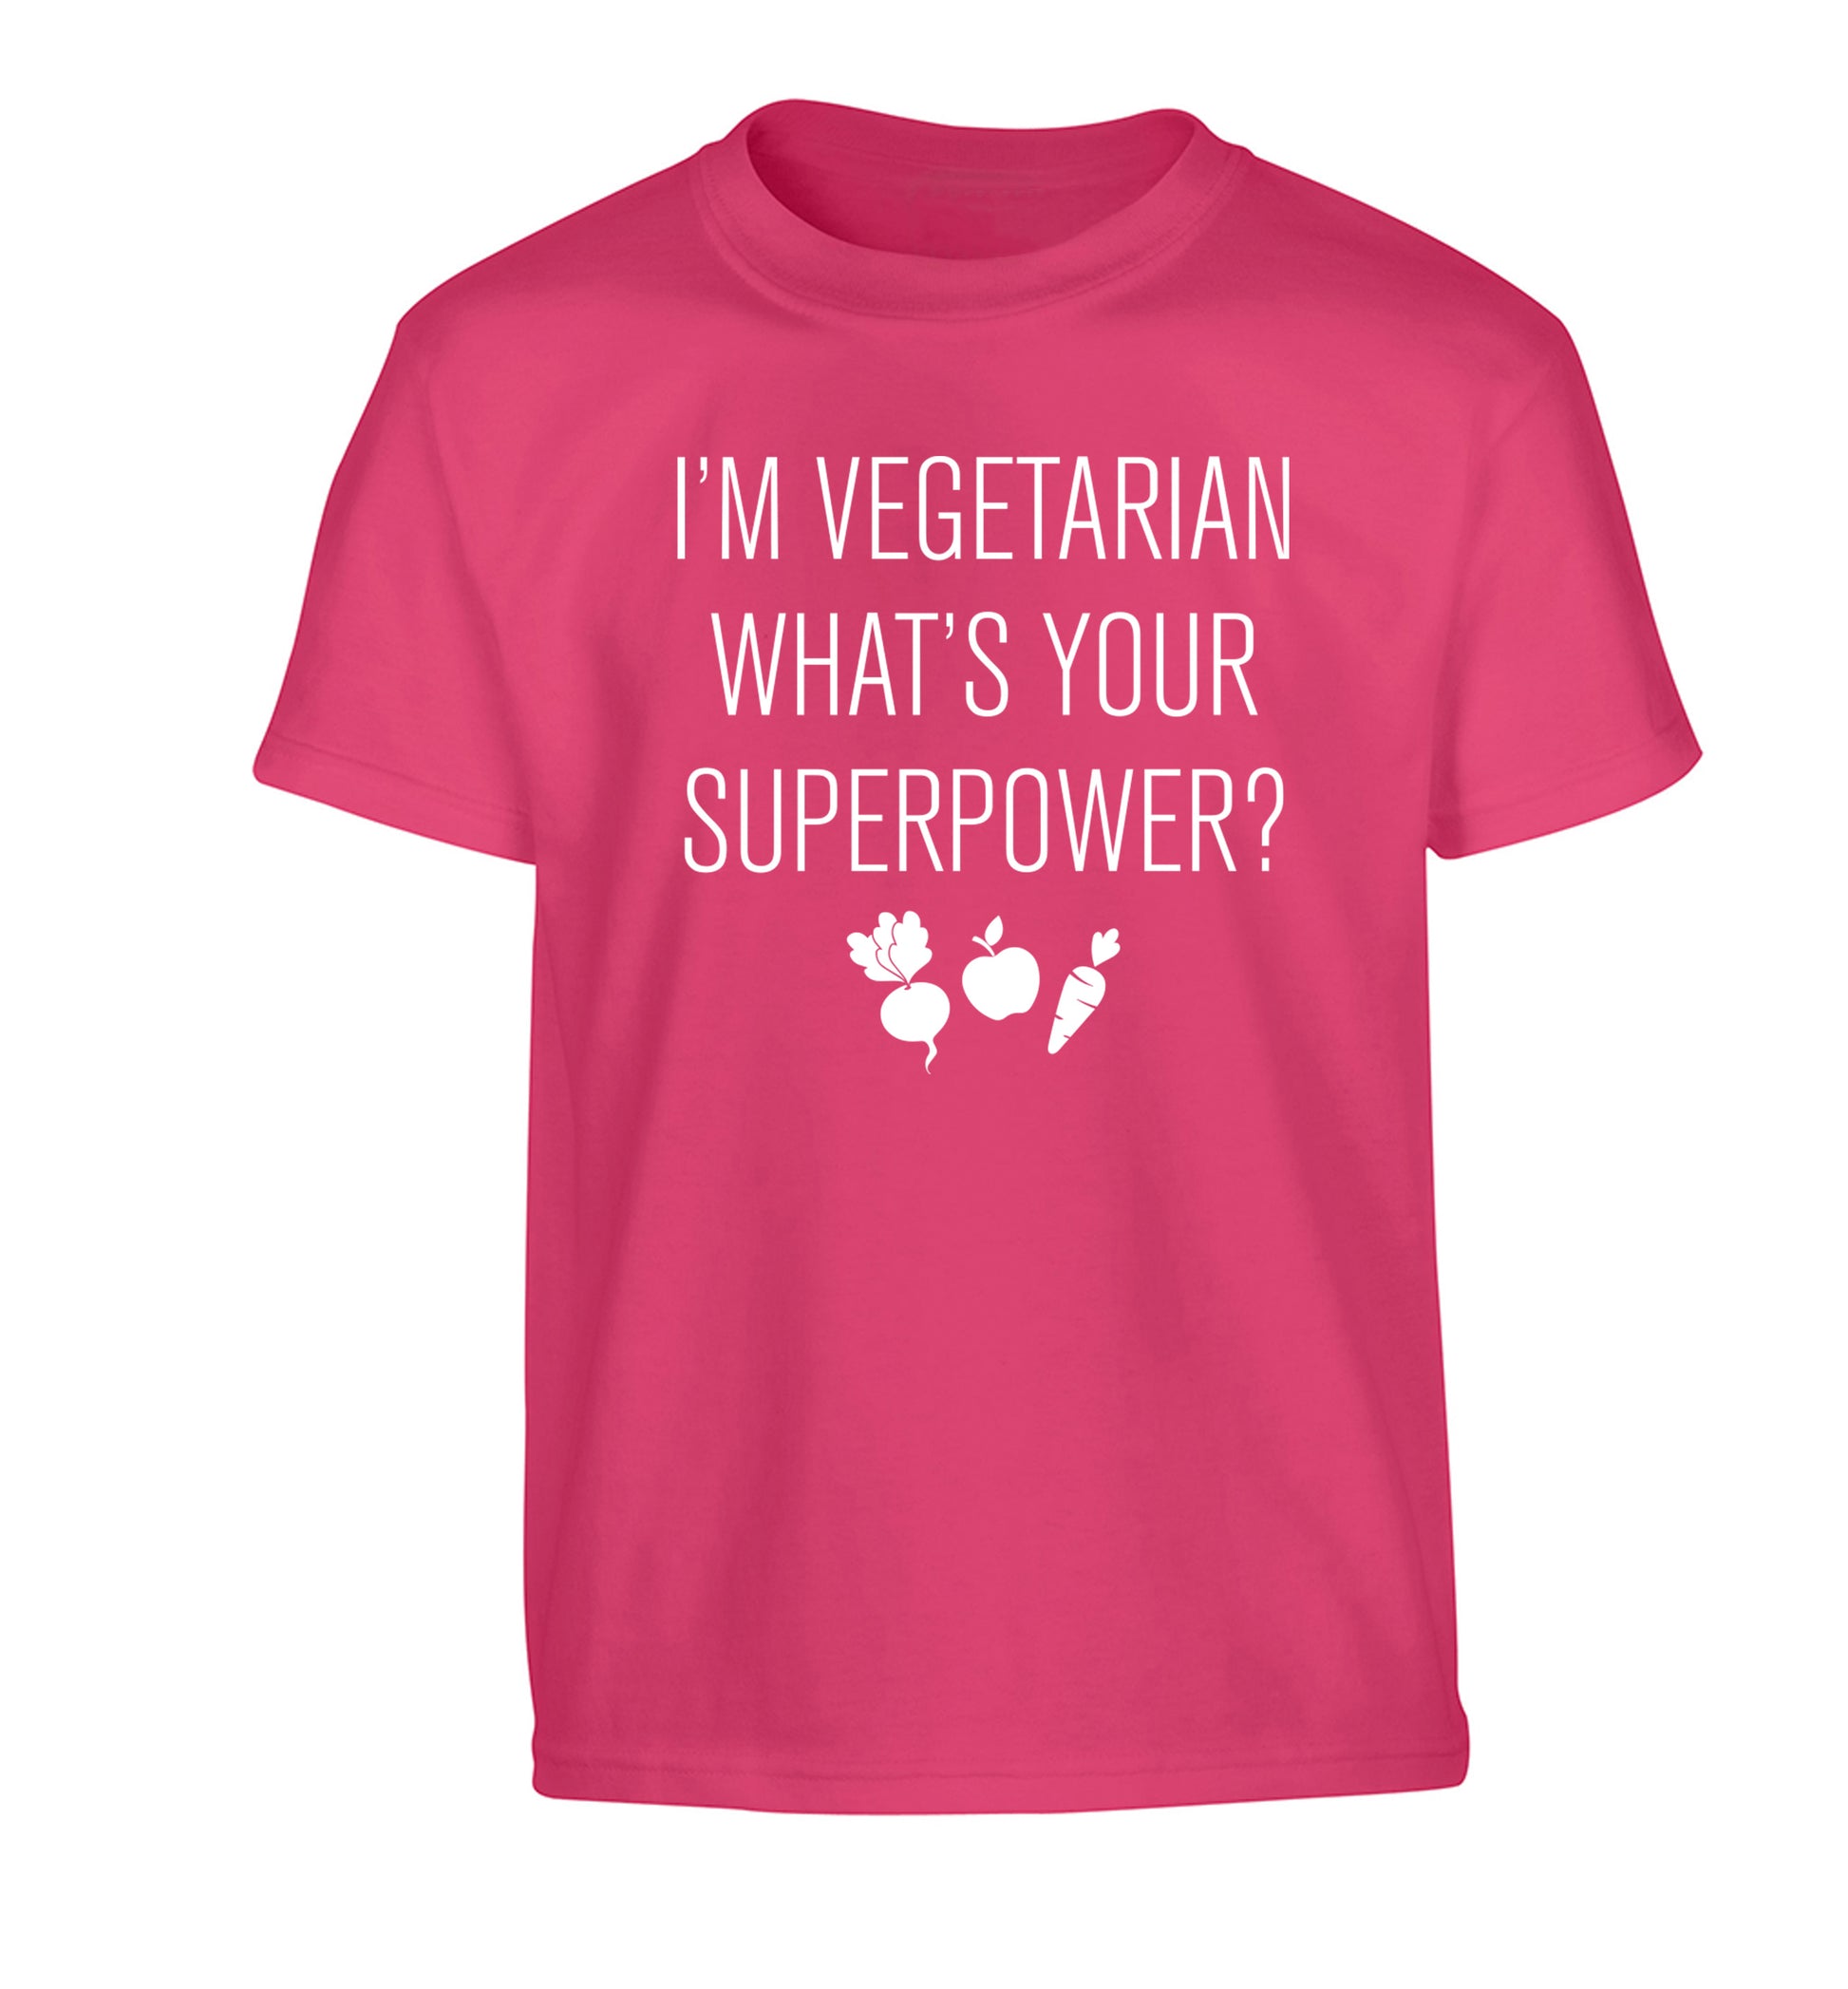 I'm vegetarian what's your superpower? Children's pink Tshirt 12-13 Years